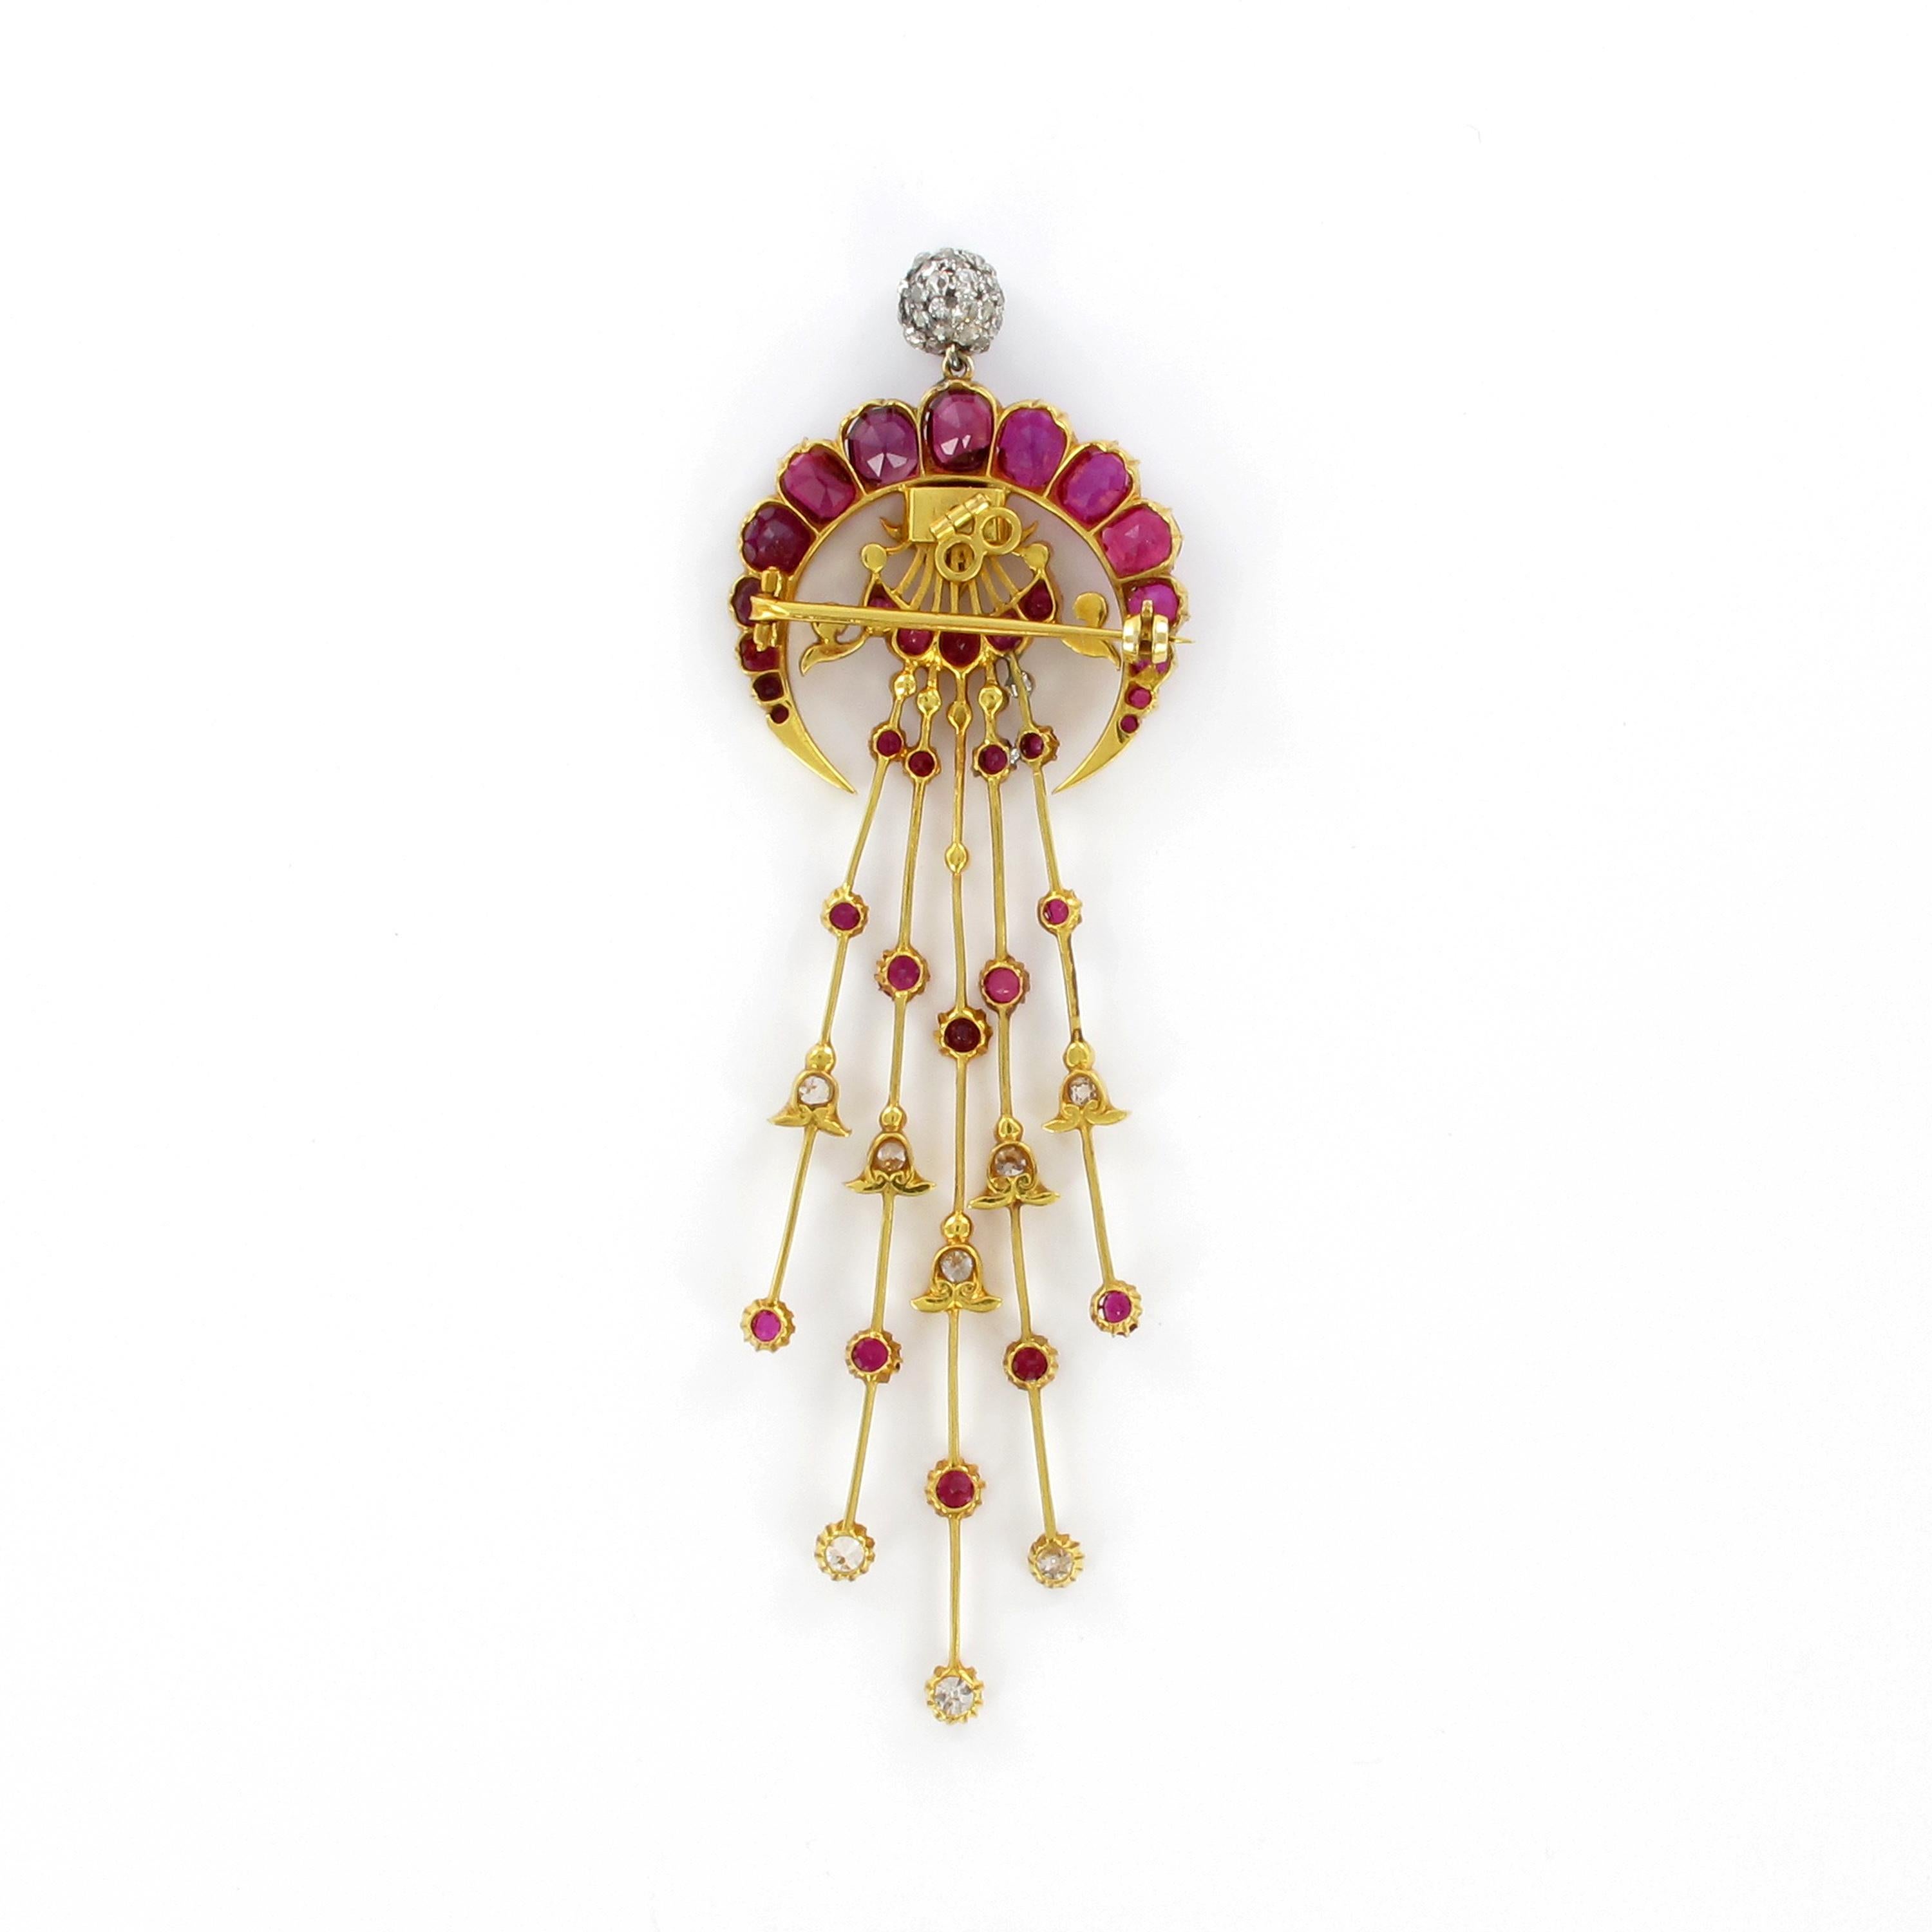 Magnificent Burma Ruby and Diamond Brooch or Pin or Head Ornament in Yellow Gold 2